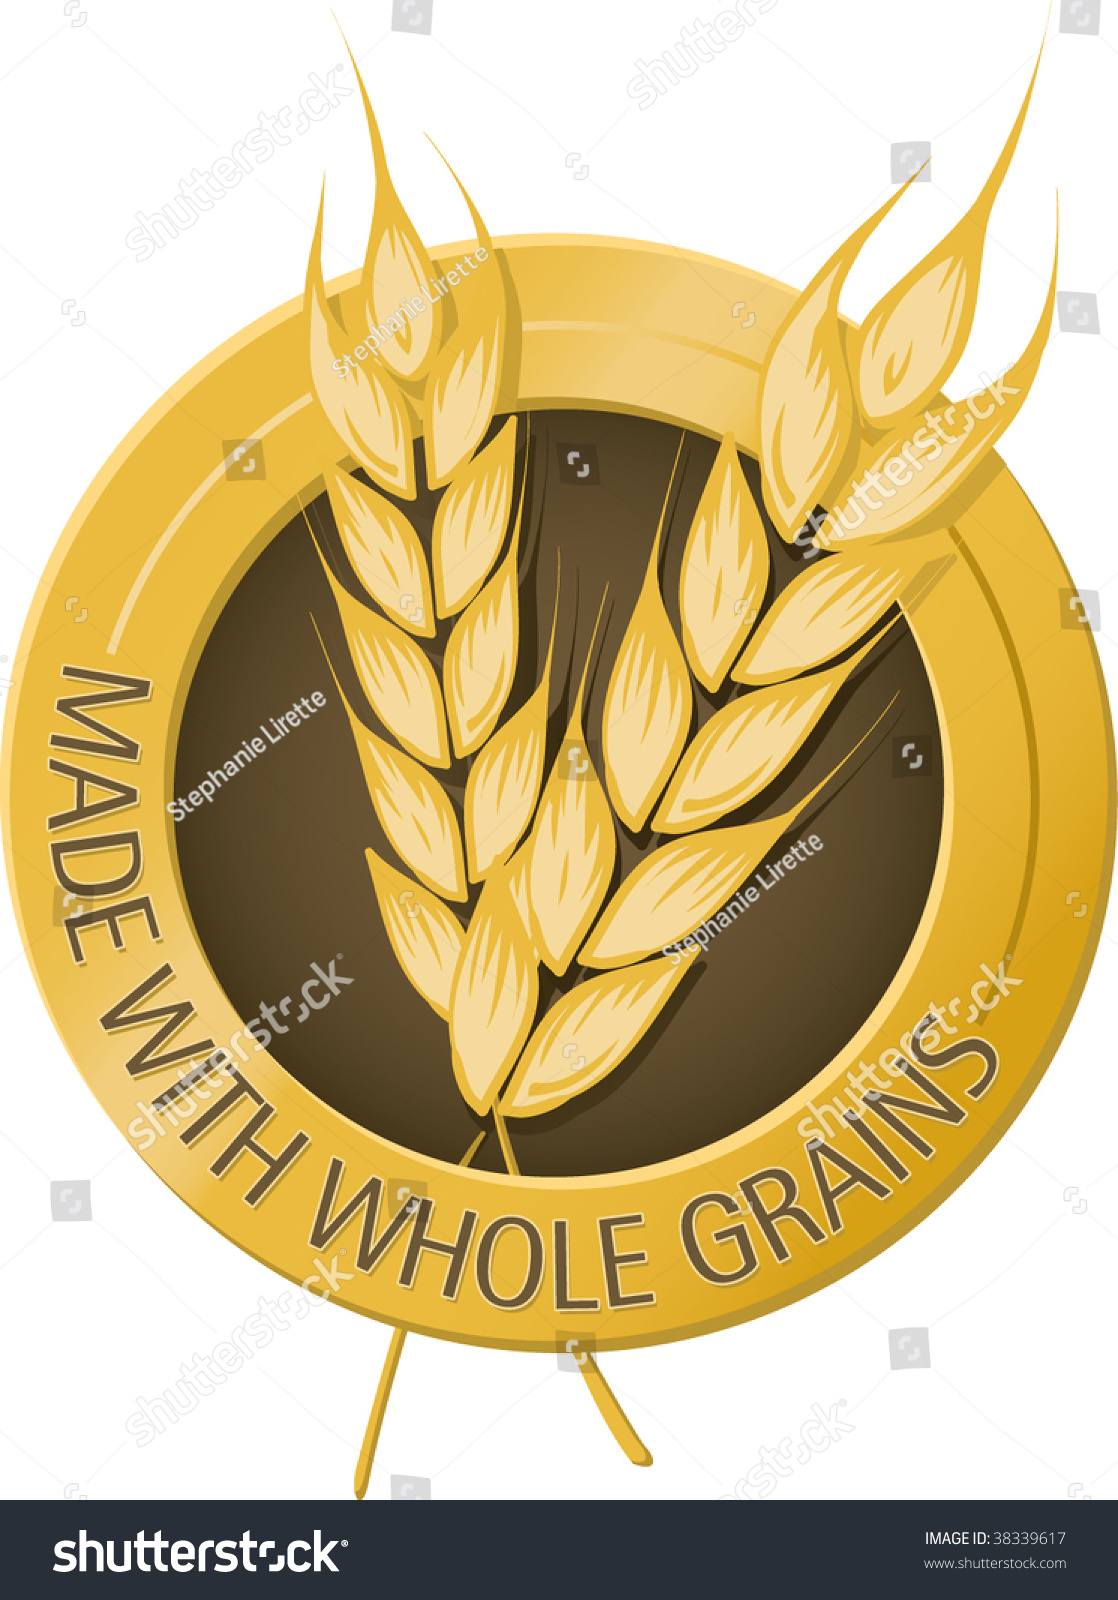 Made Whole Grains Seal Stock Vector Royalty Free 38339617